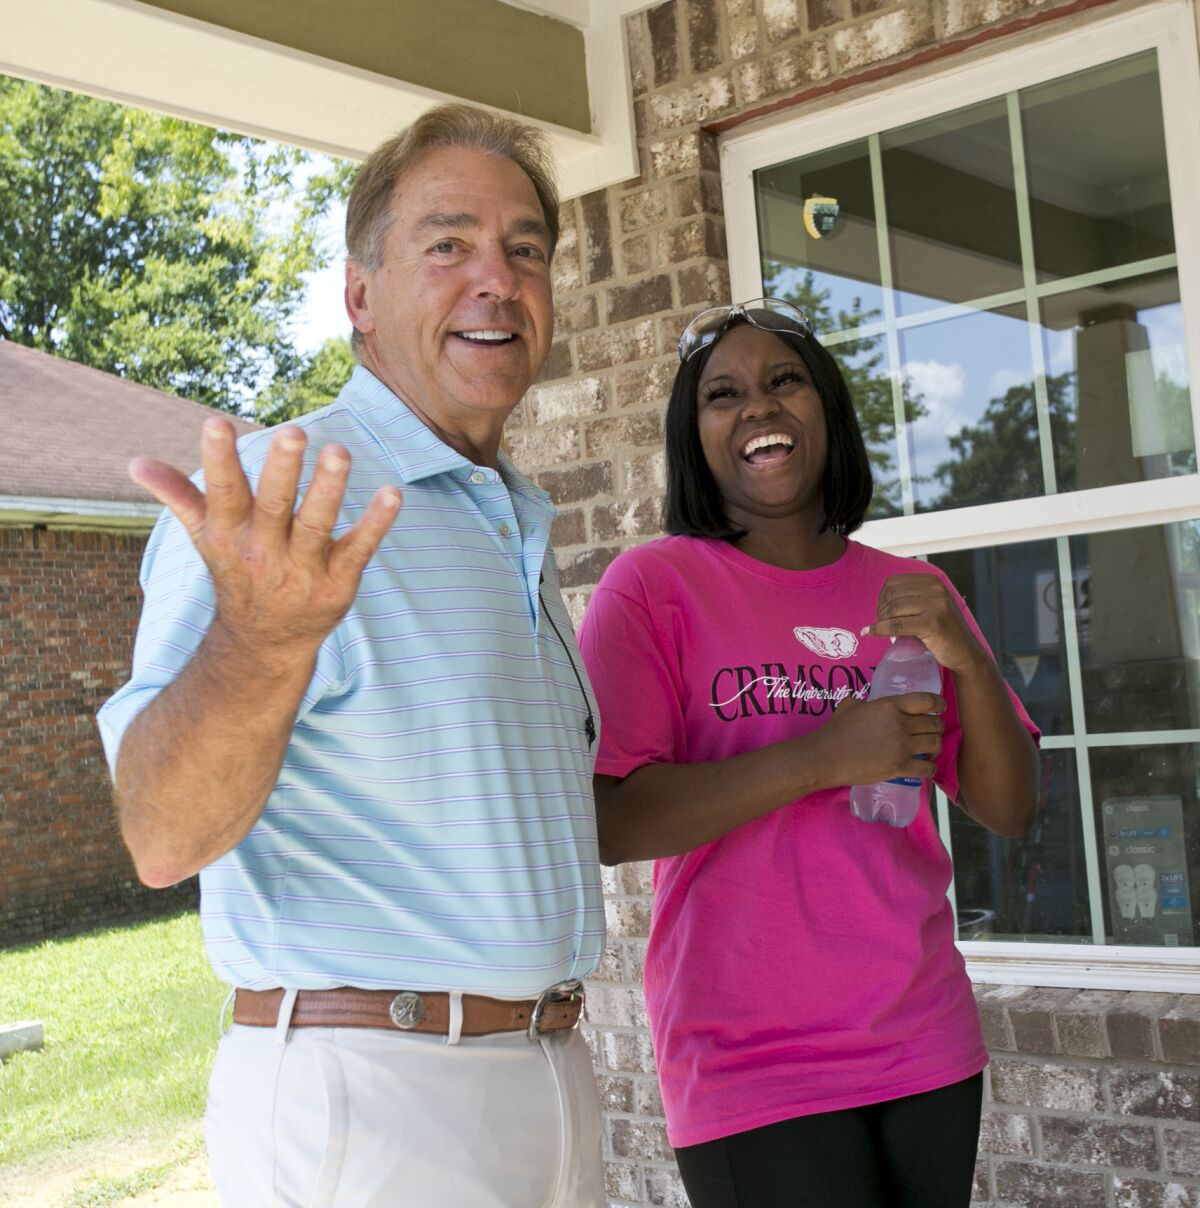 Twelve Alabama football players along with Coach Nick Saban and members of the staff helped with construction on the Habitat for Humanity Tuscaloosa's 18th Championship House funded by the Nick's Kids Foundation Tuesday, July 27, 2021, in Tuscaloosa, Alabama. Saban and homeowner Joselyn Hamner share a laugh on the front porch of her new house. (Gary Cosby Jr./The Tuscaloosa News via AP)